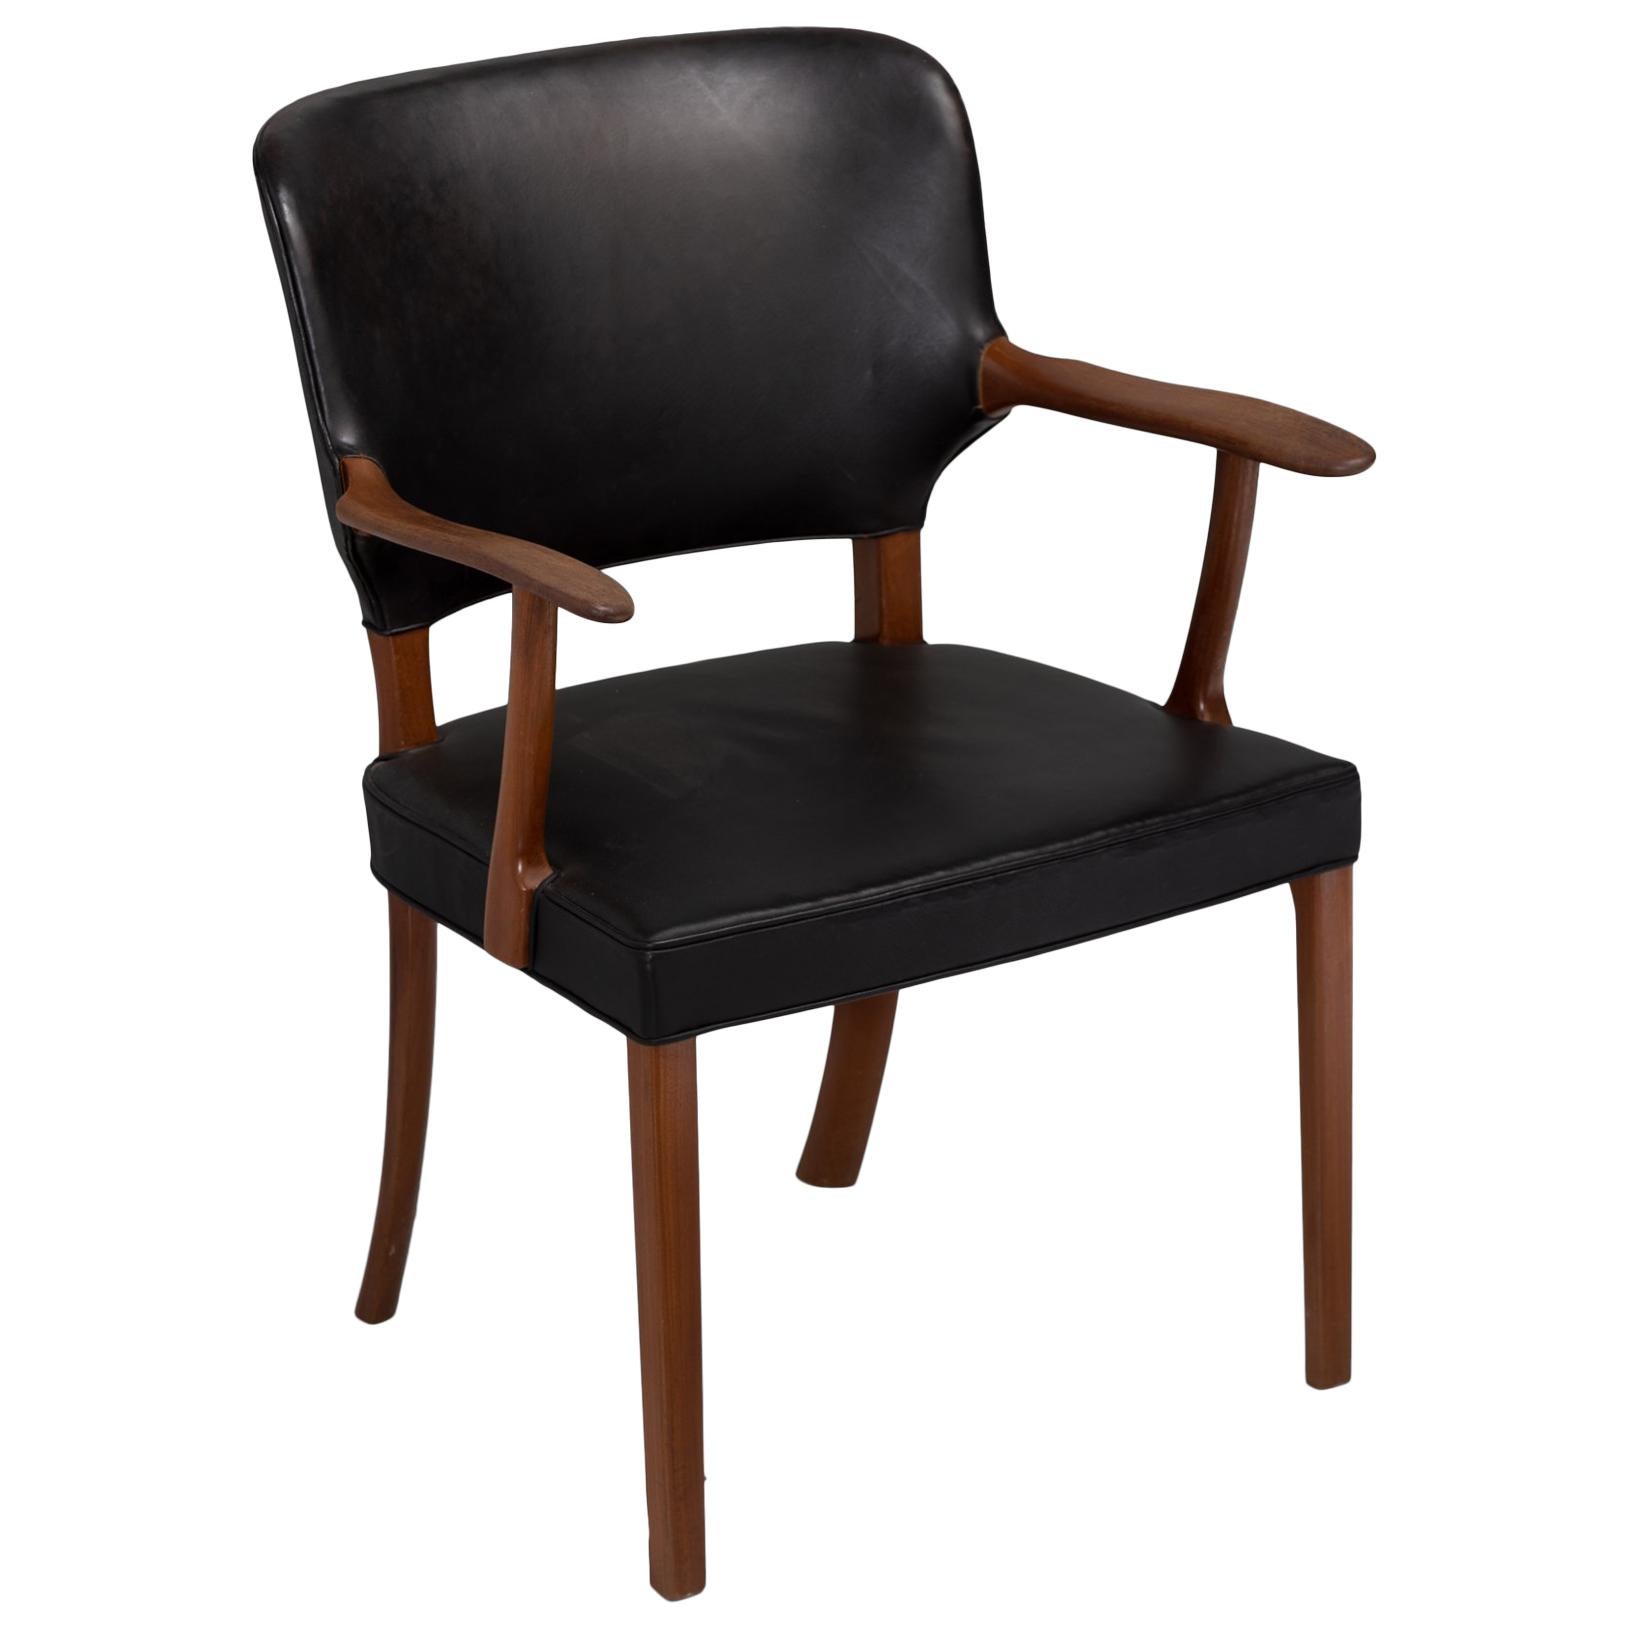 Mahogany and Black Leather Armchair by Ole Wanscher, Denmark, circa 1940